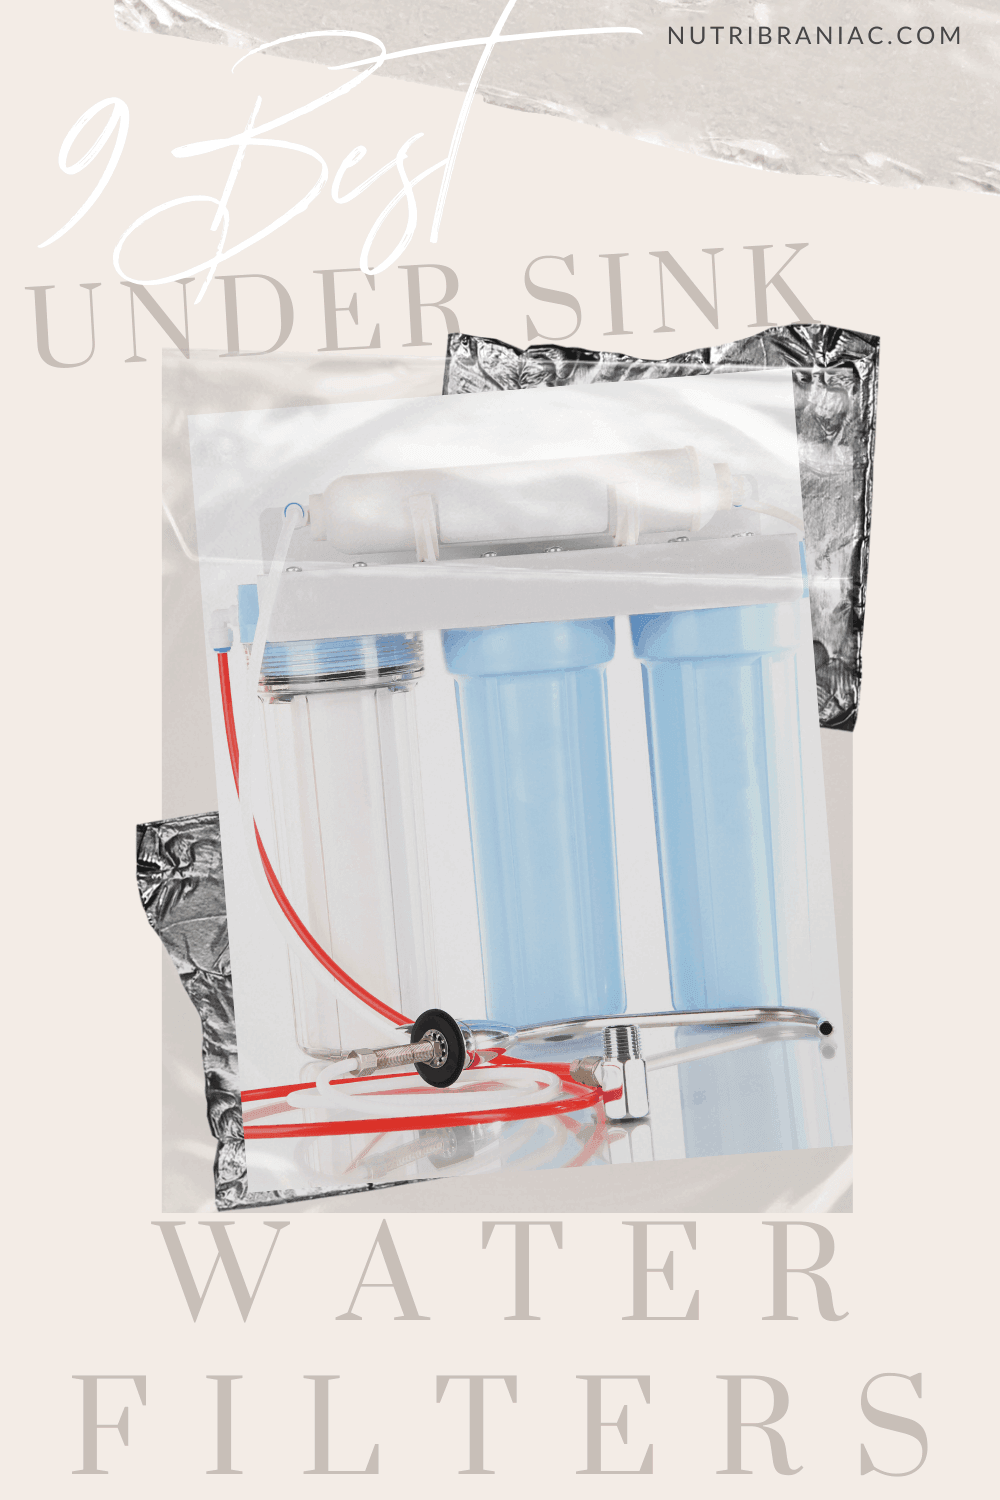 Image of a water purification filters with faucet with overlay text "9 Best Under Sink Water Filters"